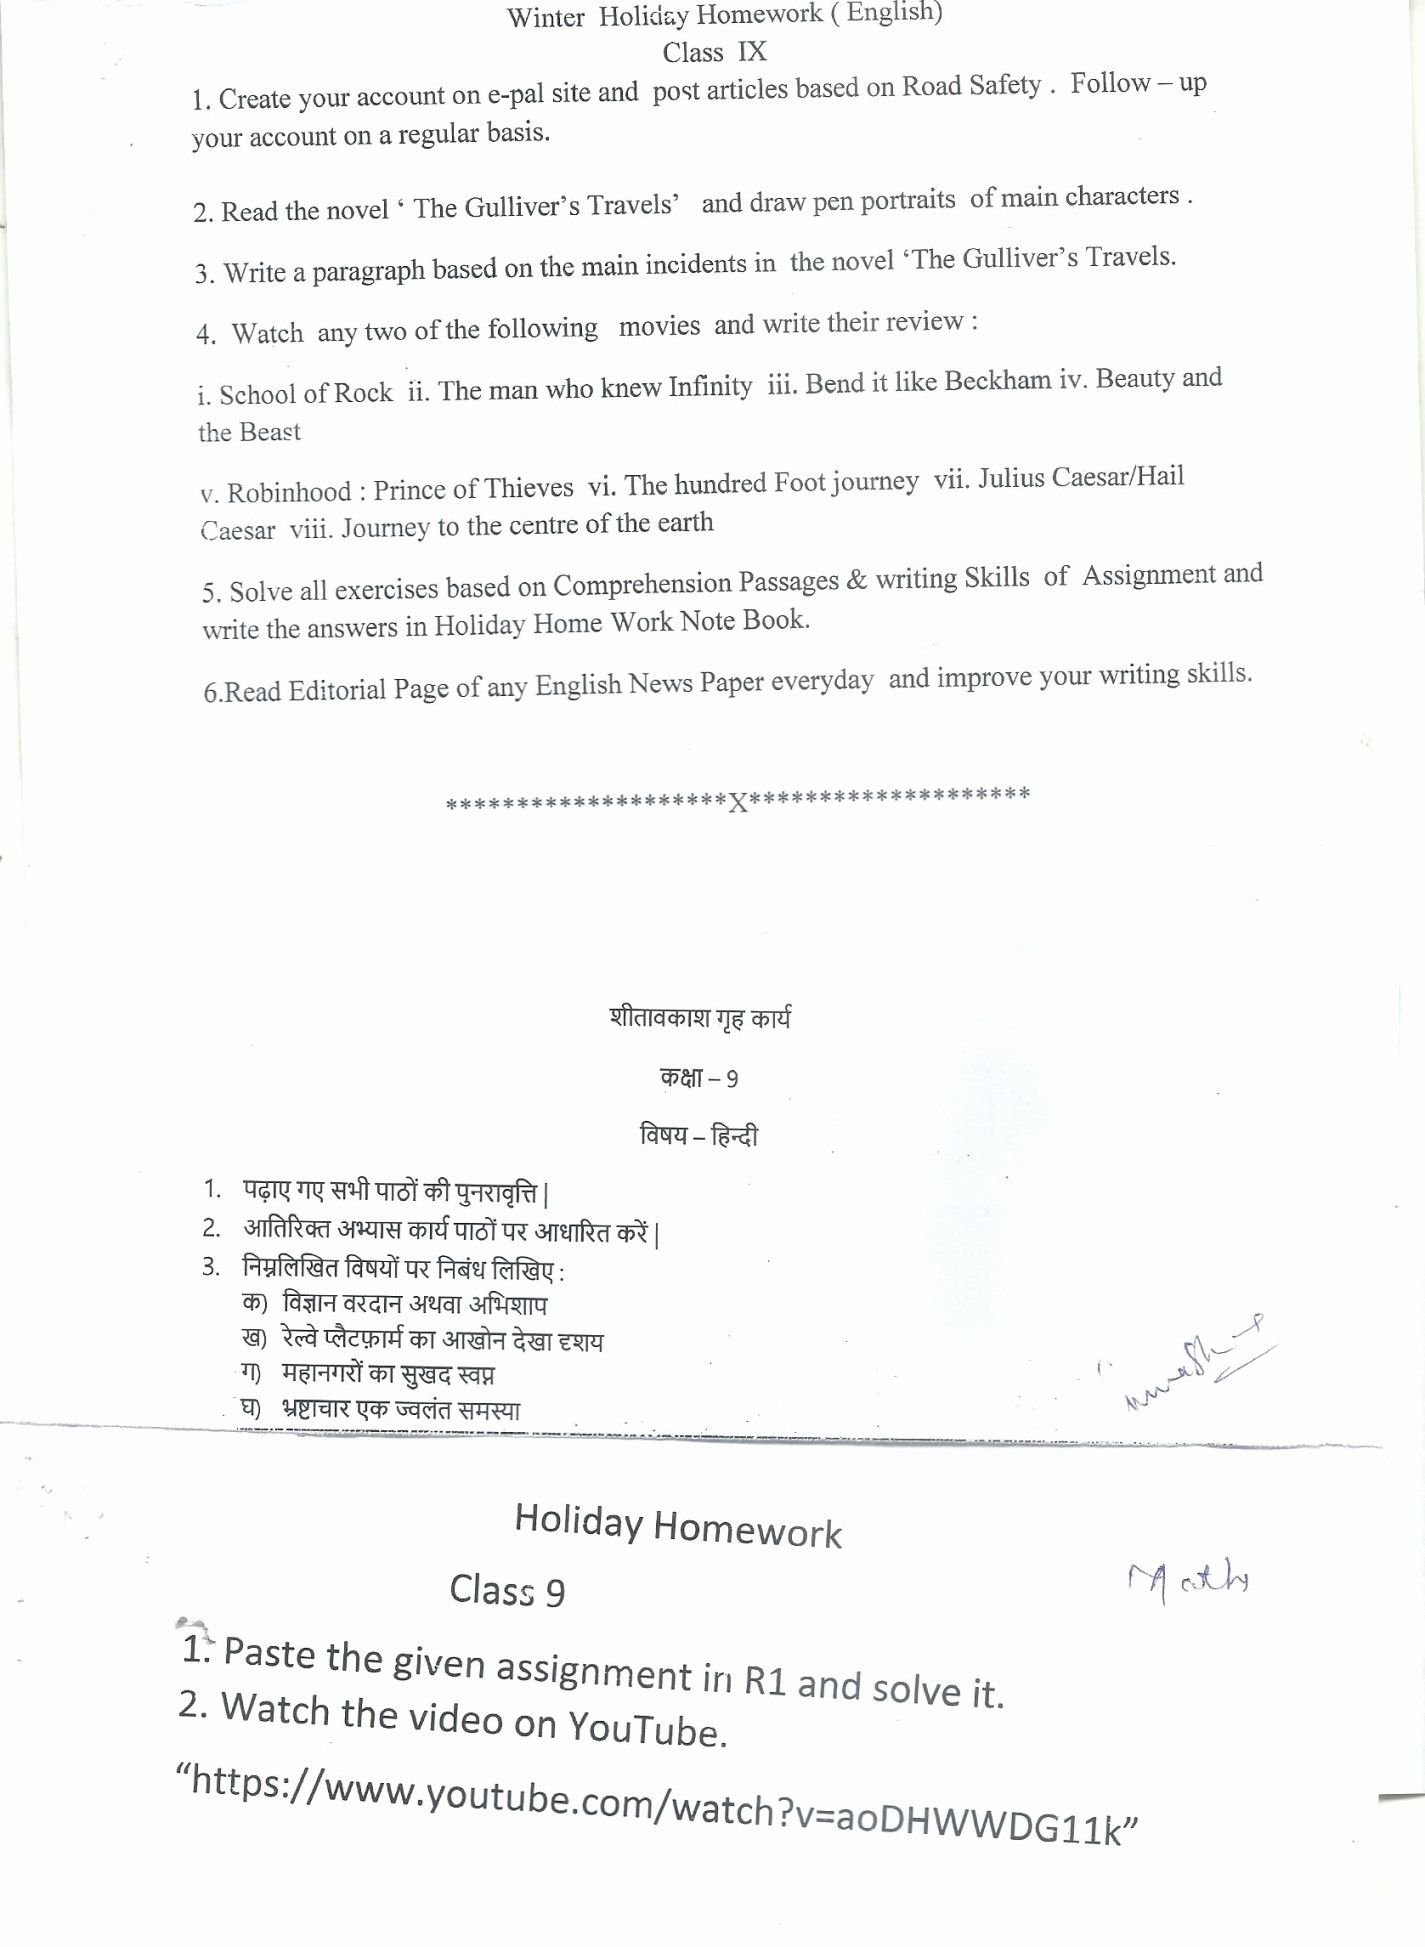 Momentum Impulse And Momentum Change Worksheet Answers Physics For Momentum And Collisions Worksheet Answers Physics Classroom